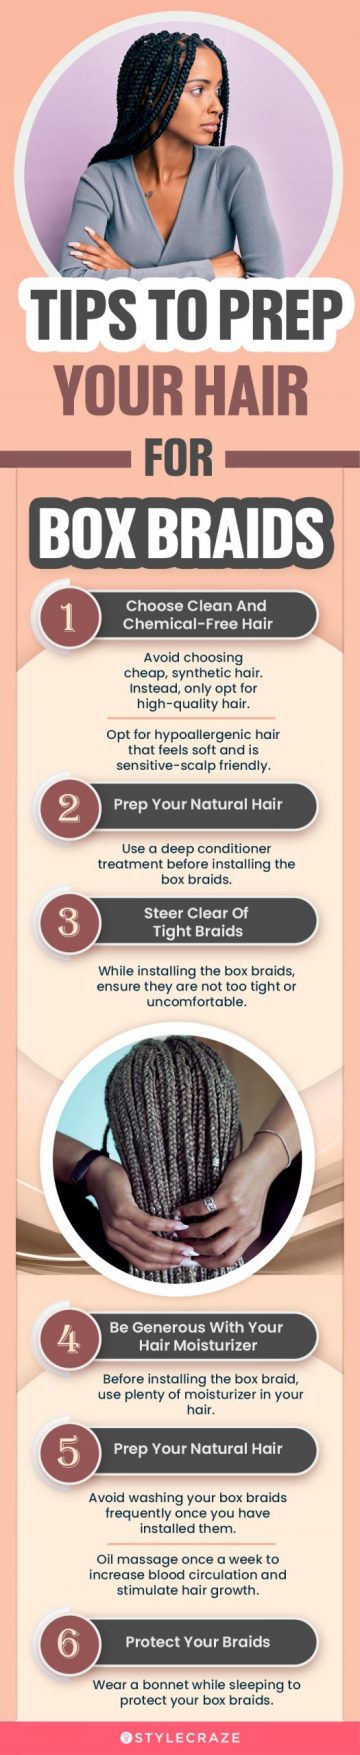 Tips To Prep Your Hair For Box Braid (infographic)